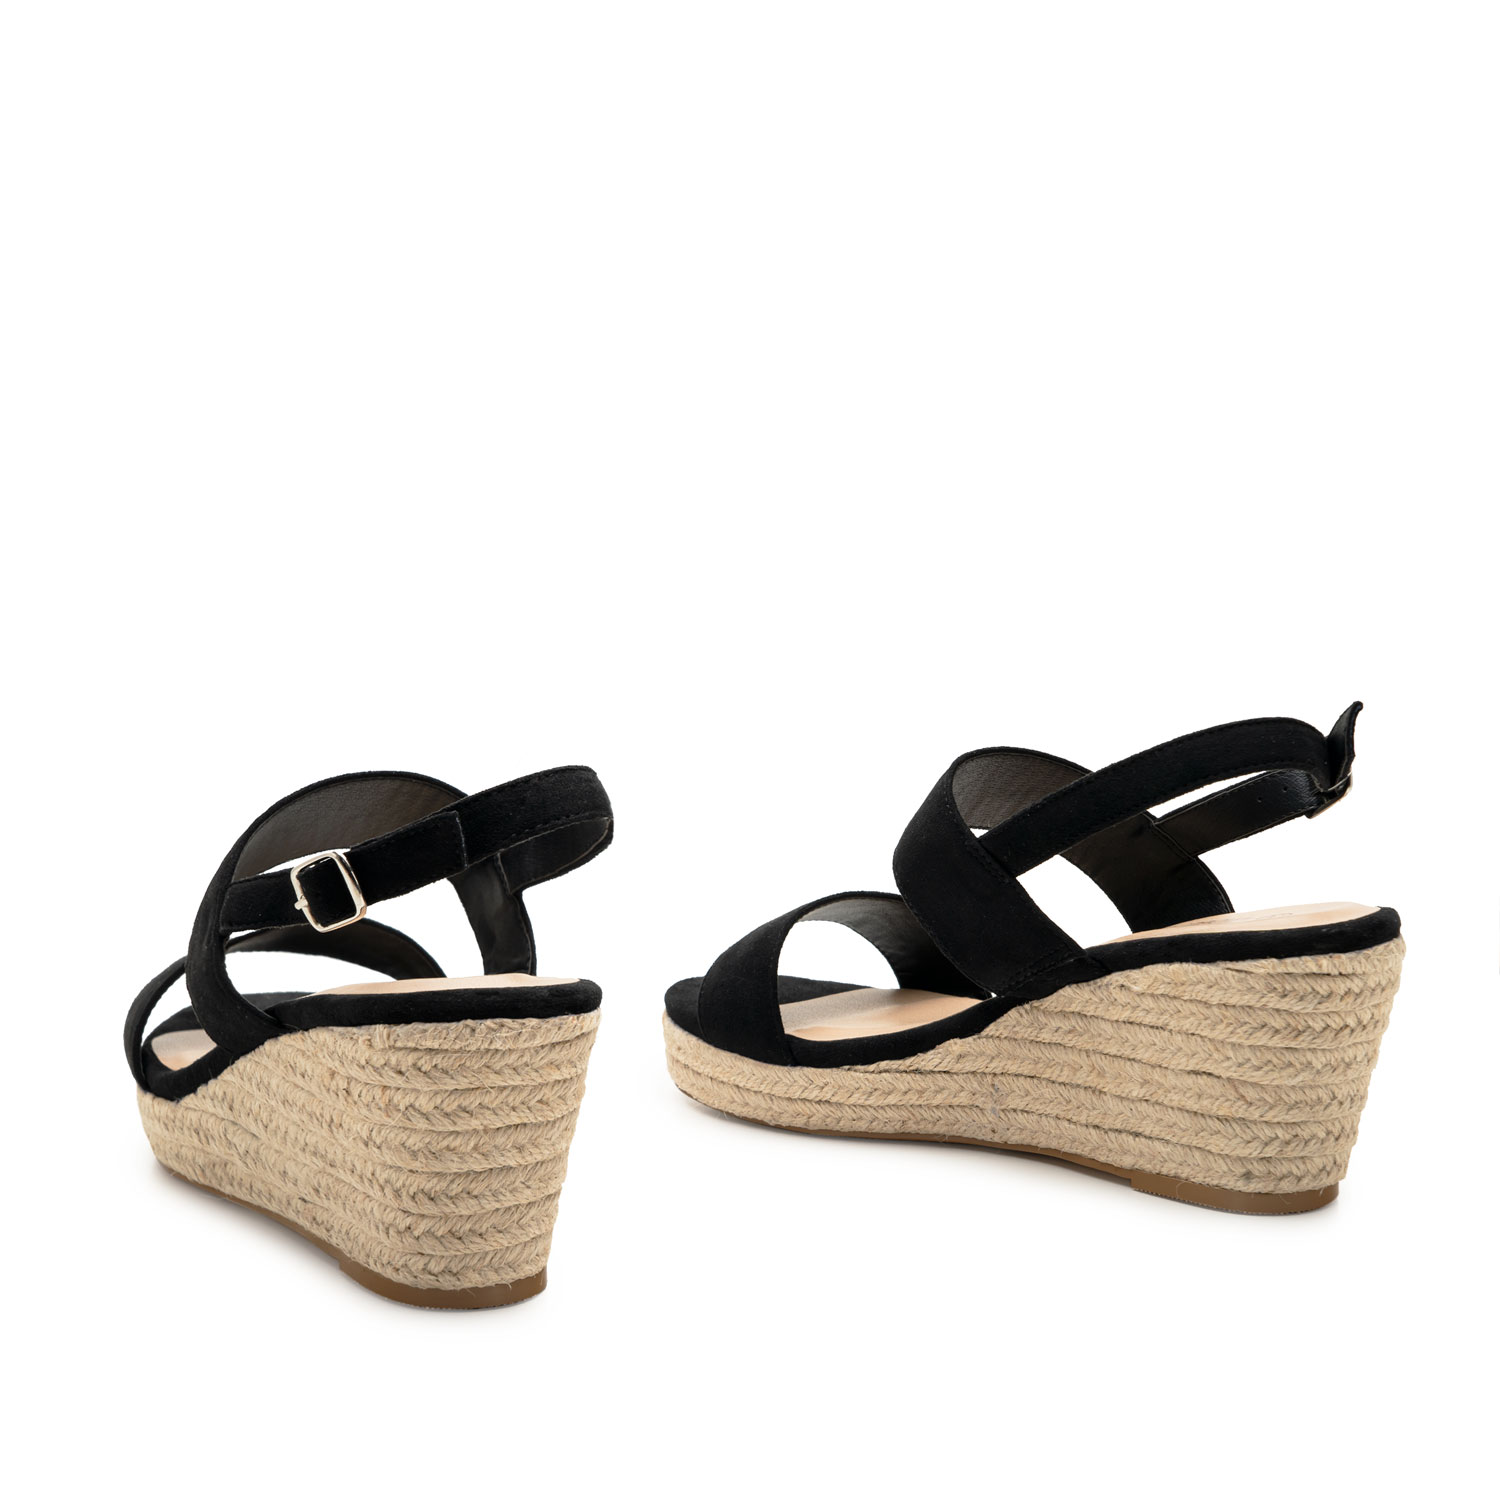 Black Faux Suede Espadrille with Jute Wedge 